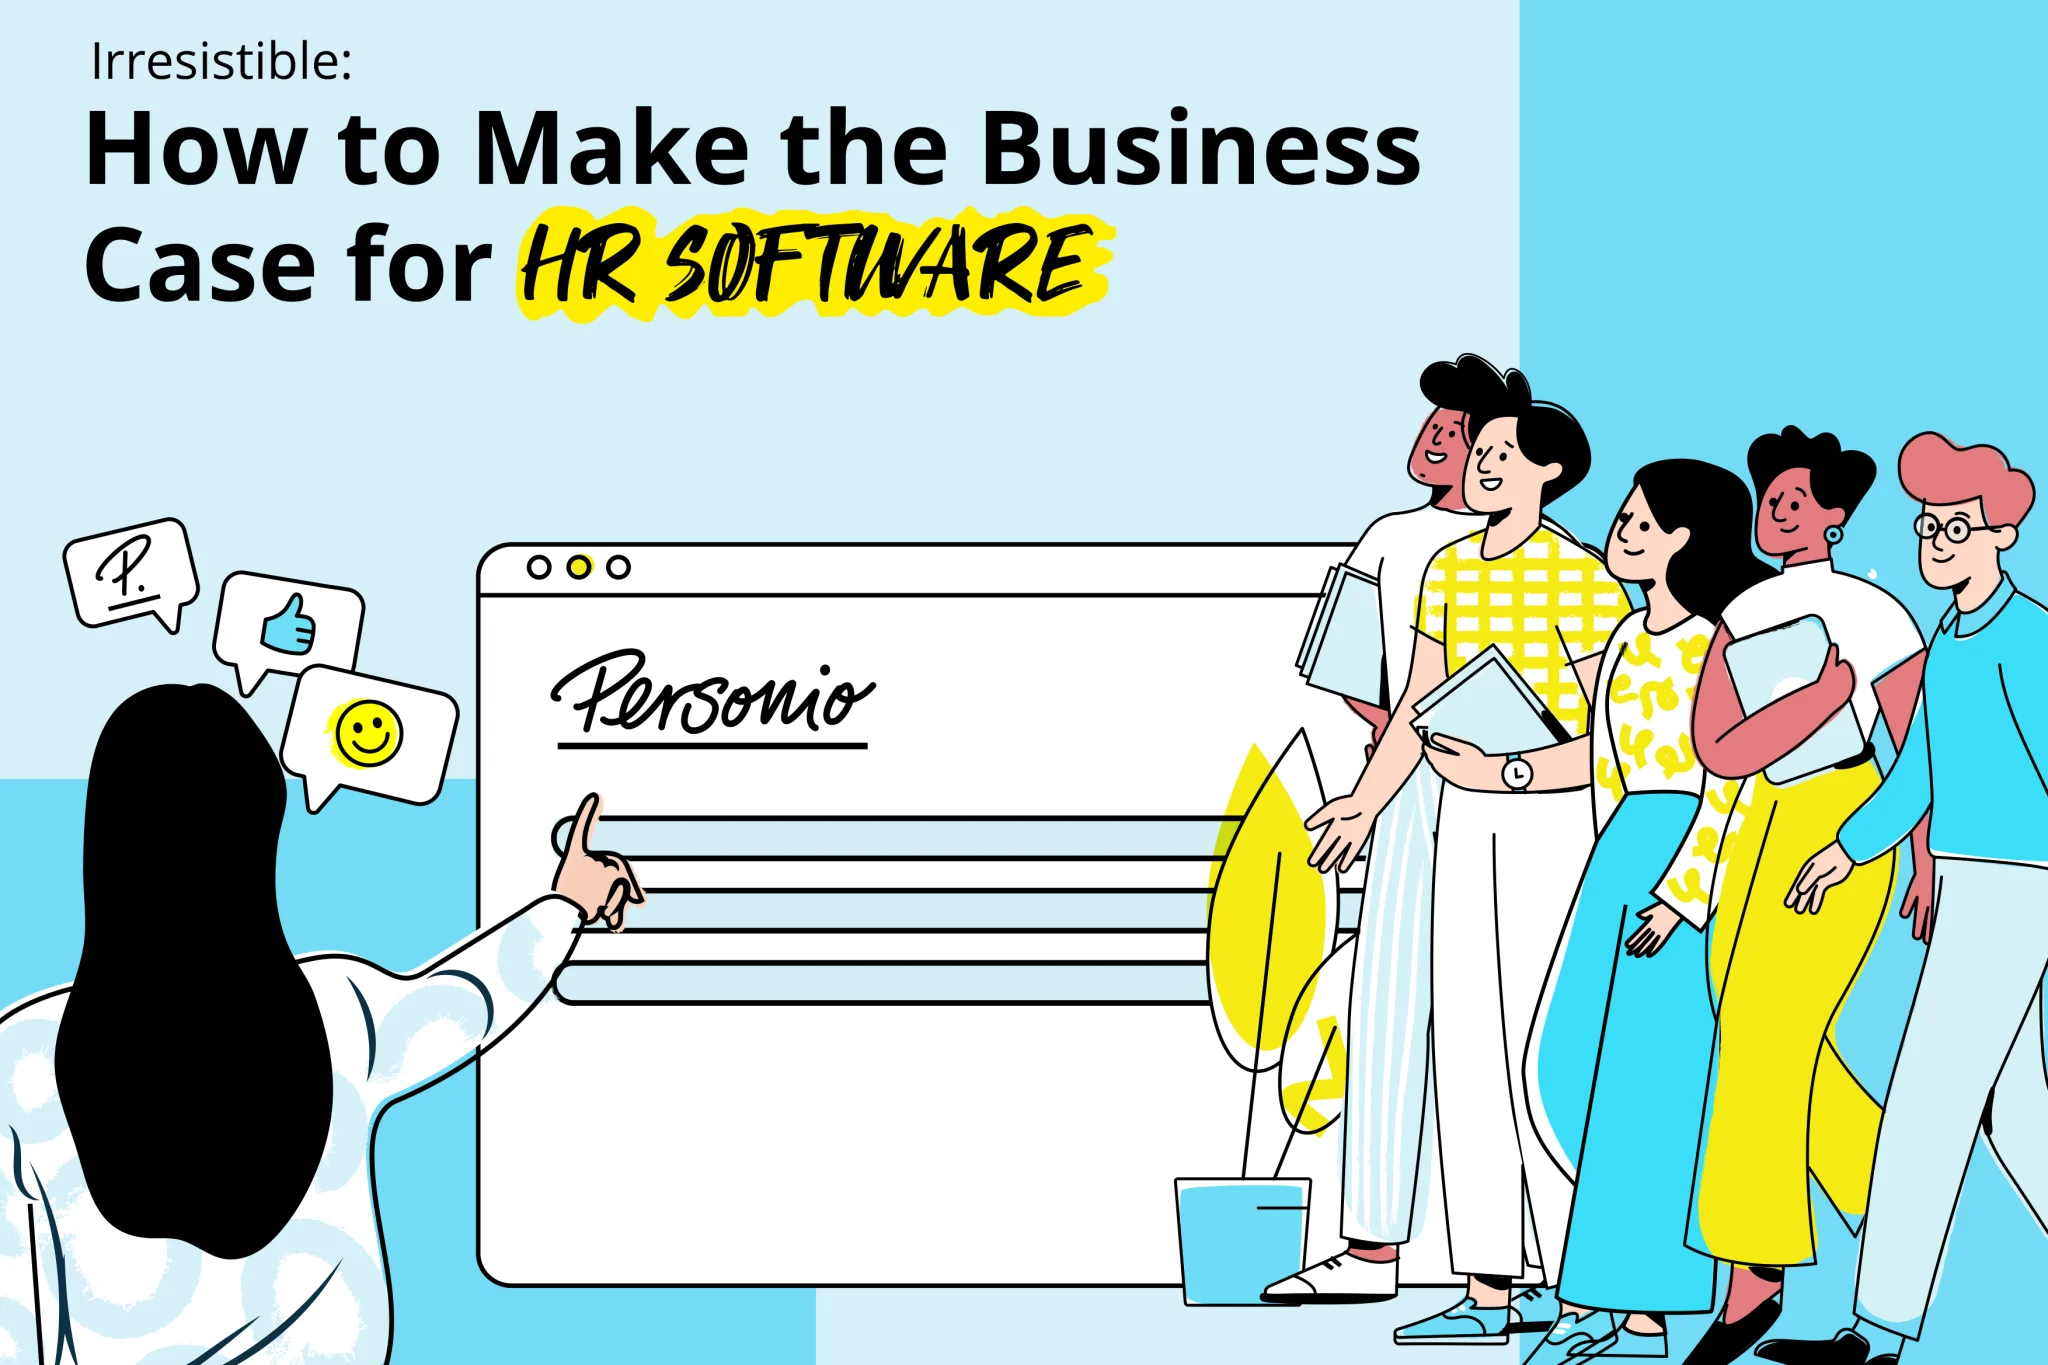 Guide: Making the Business Case for HR Software